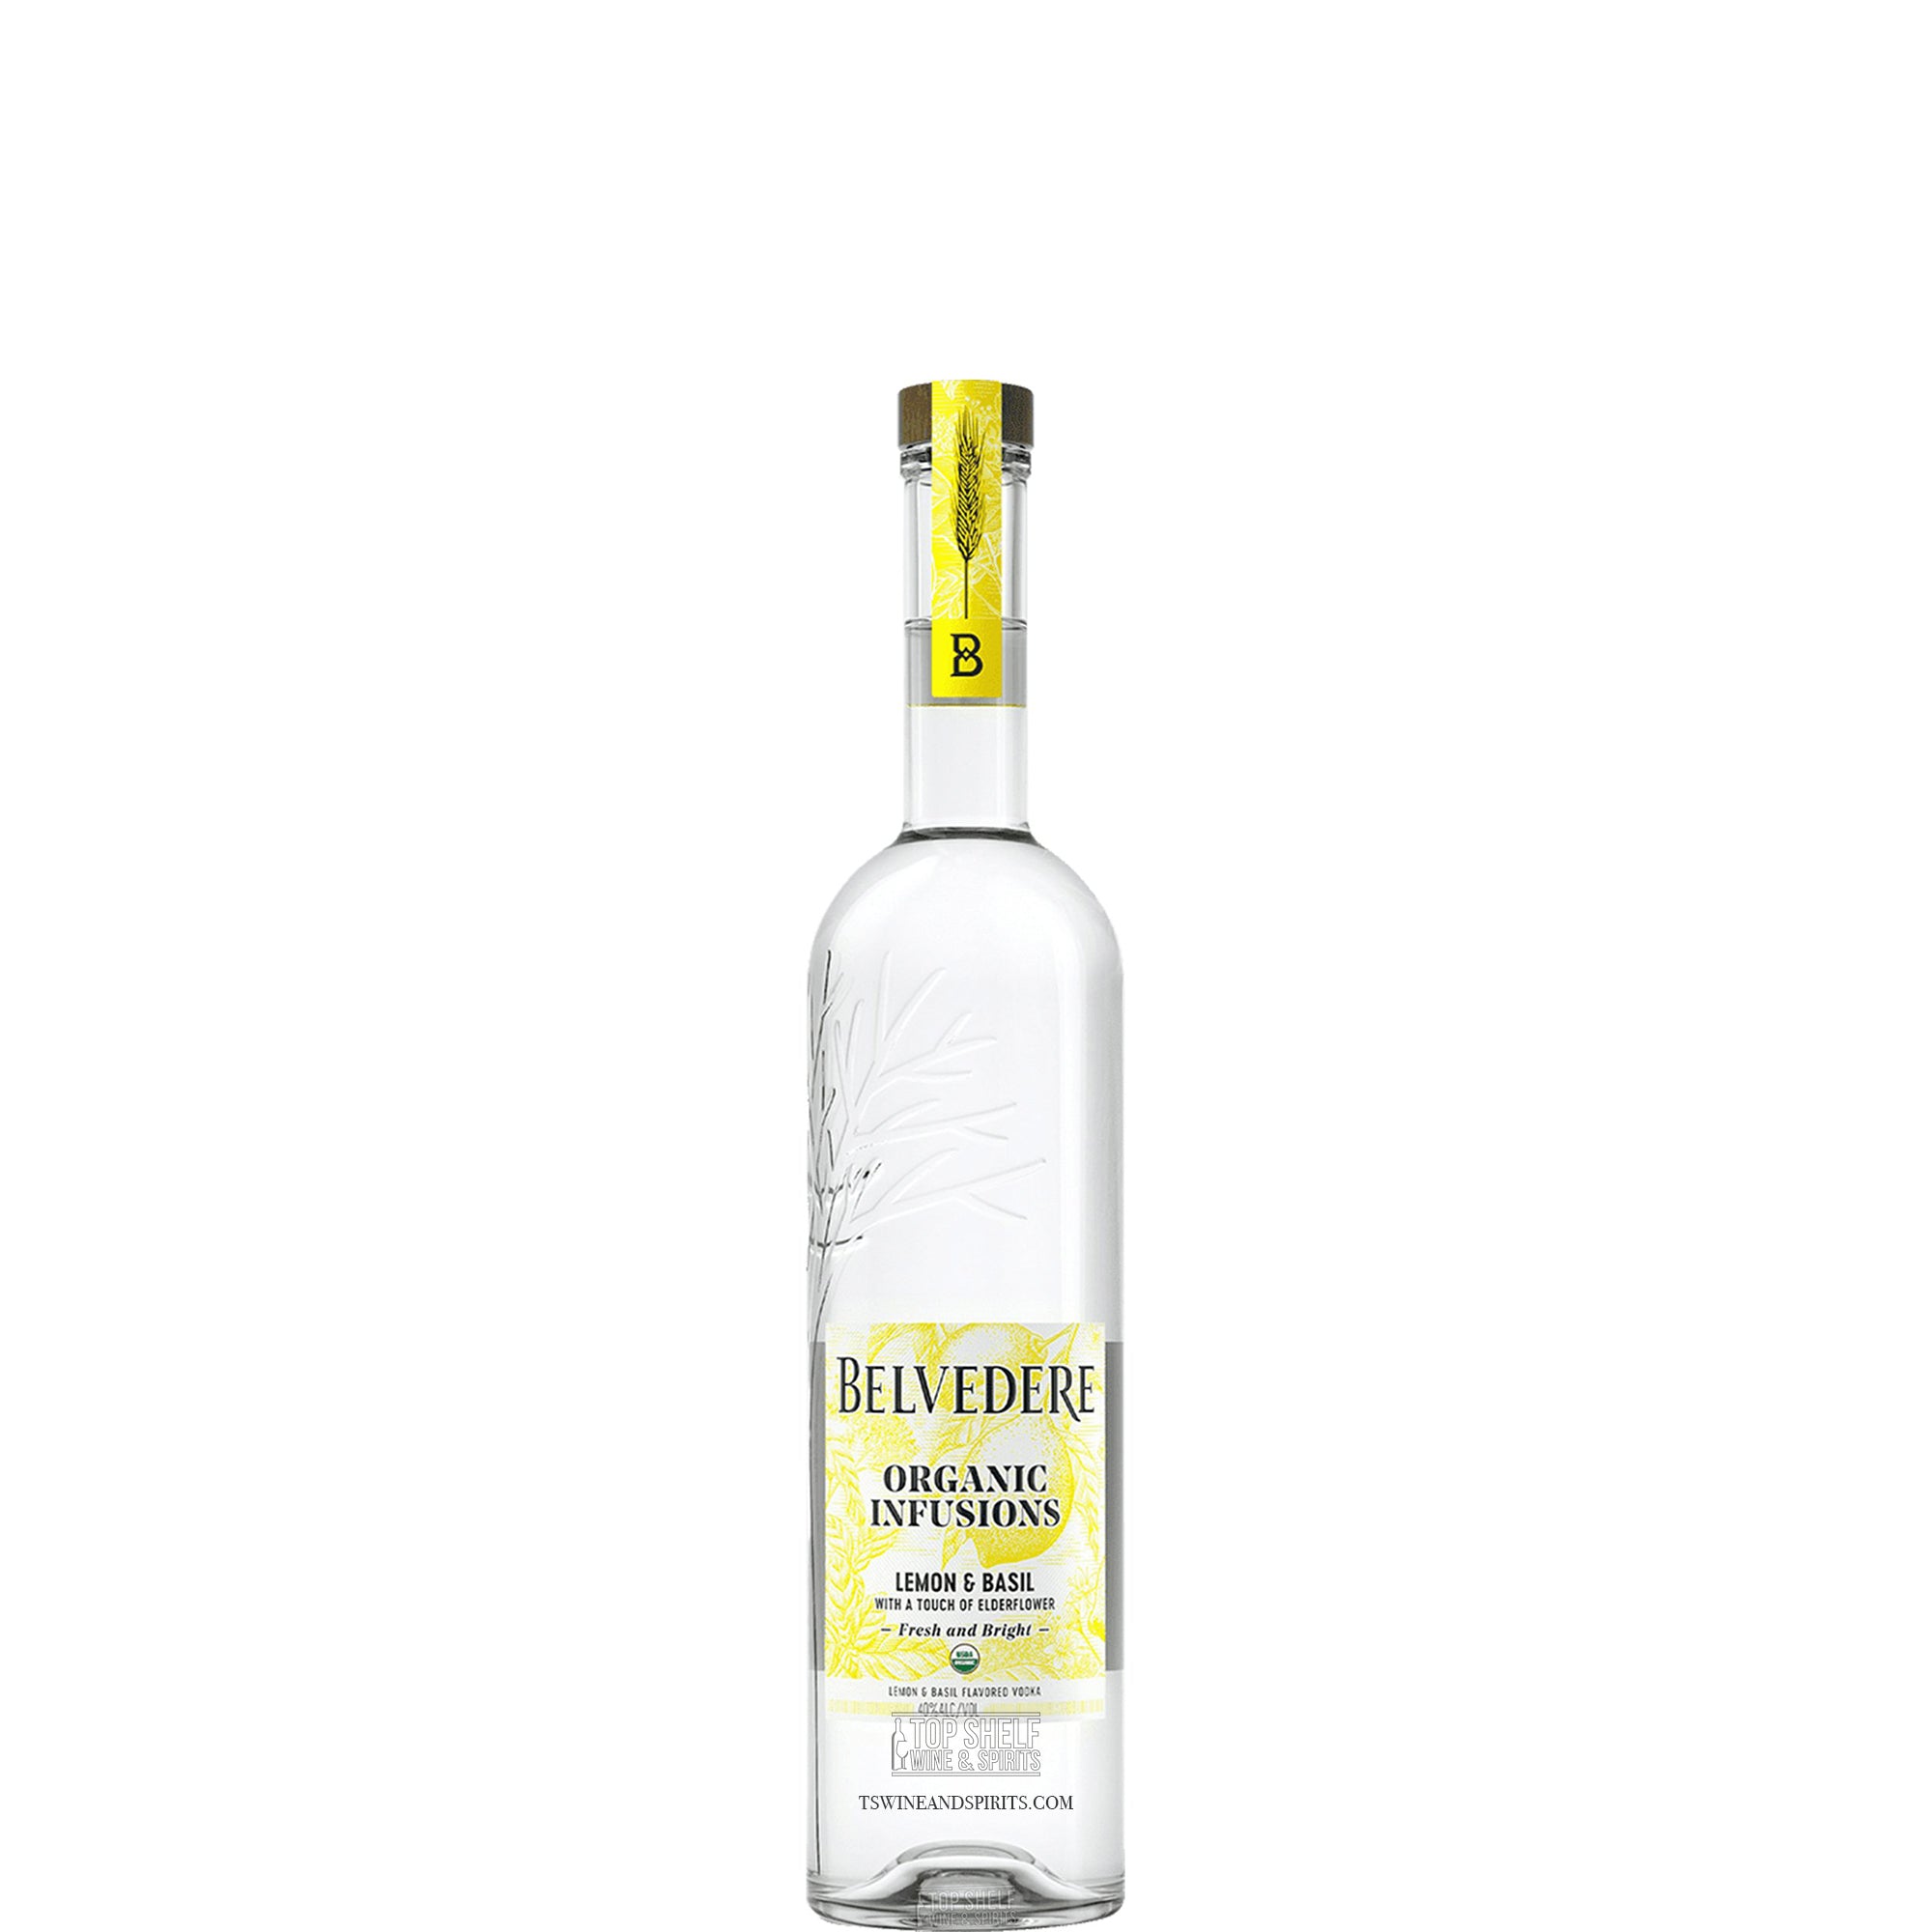 11 Things You Should Know About Belvedere Vodka